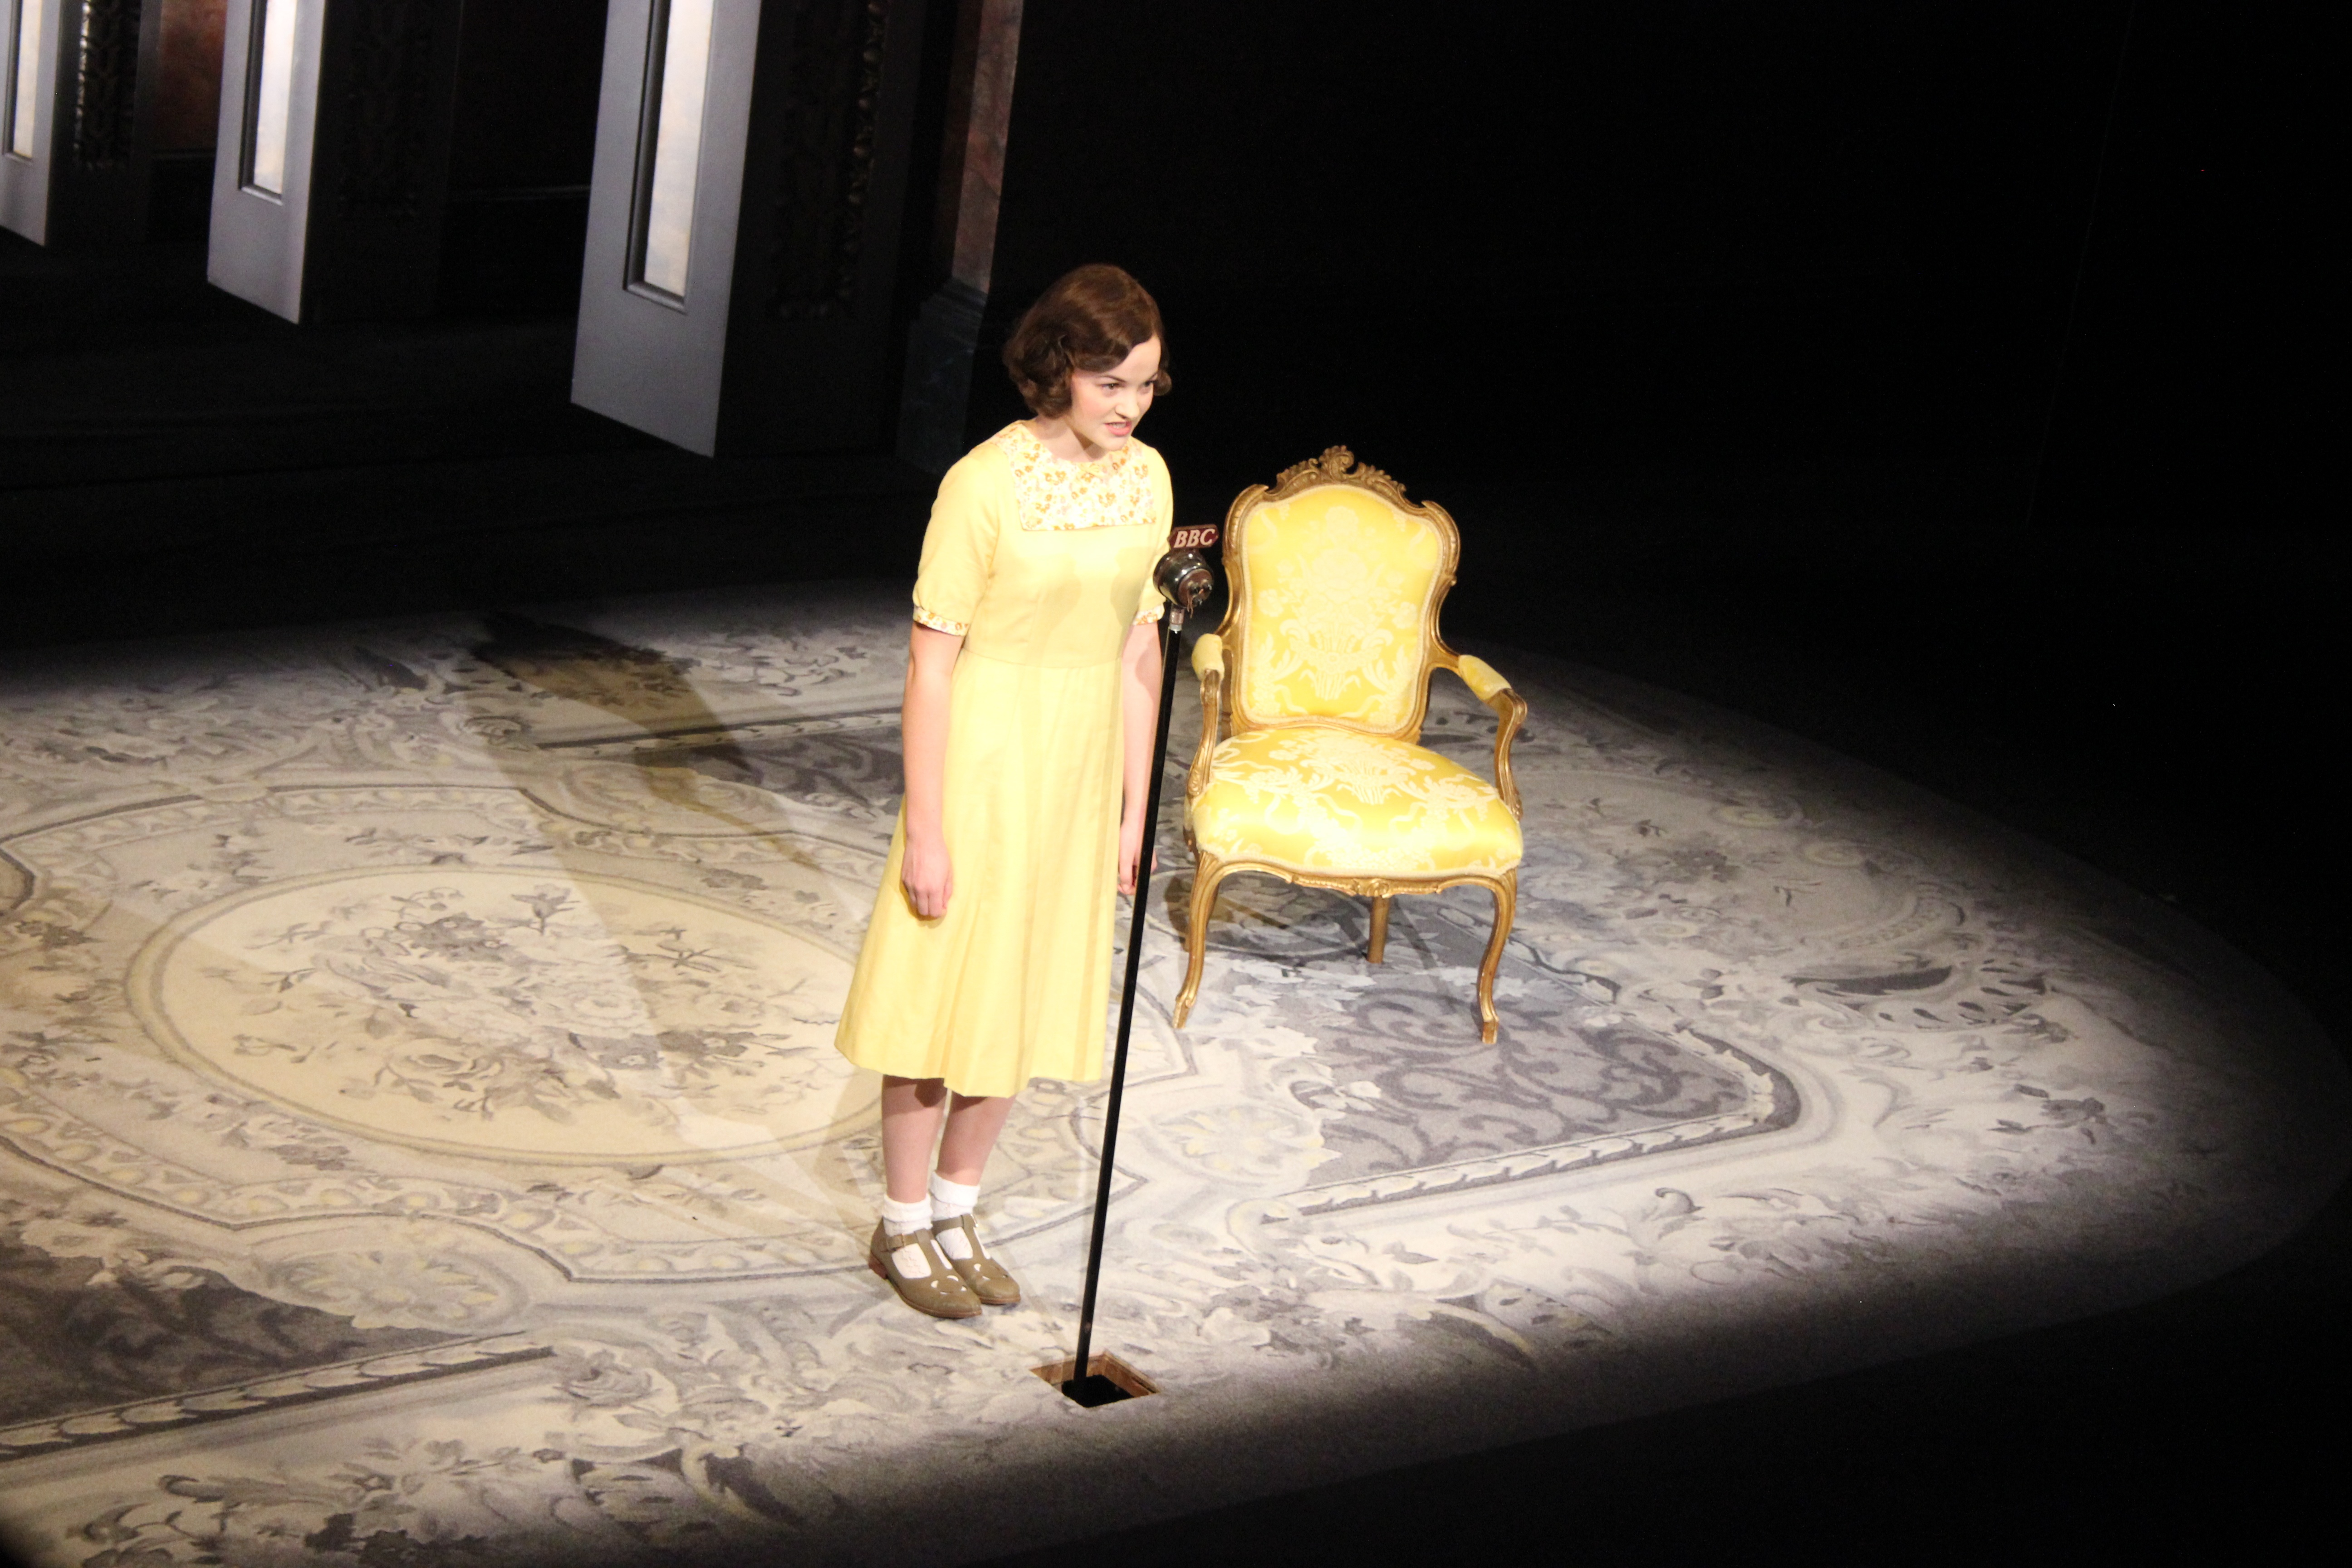 Izzy as 'Young Elizabeth' in 'The Audience' play, directed by Stephen Daldry, The Apollo Theatre, London